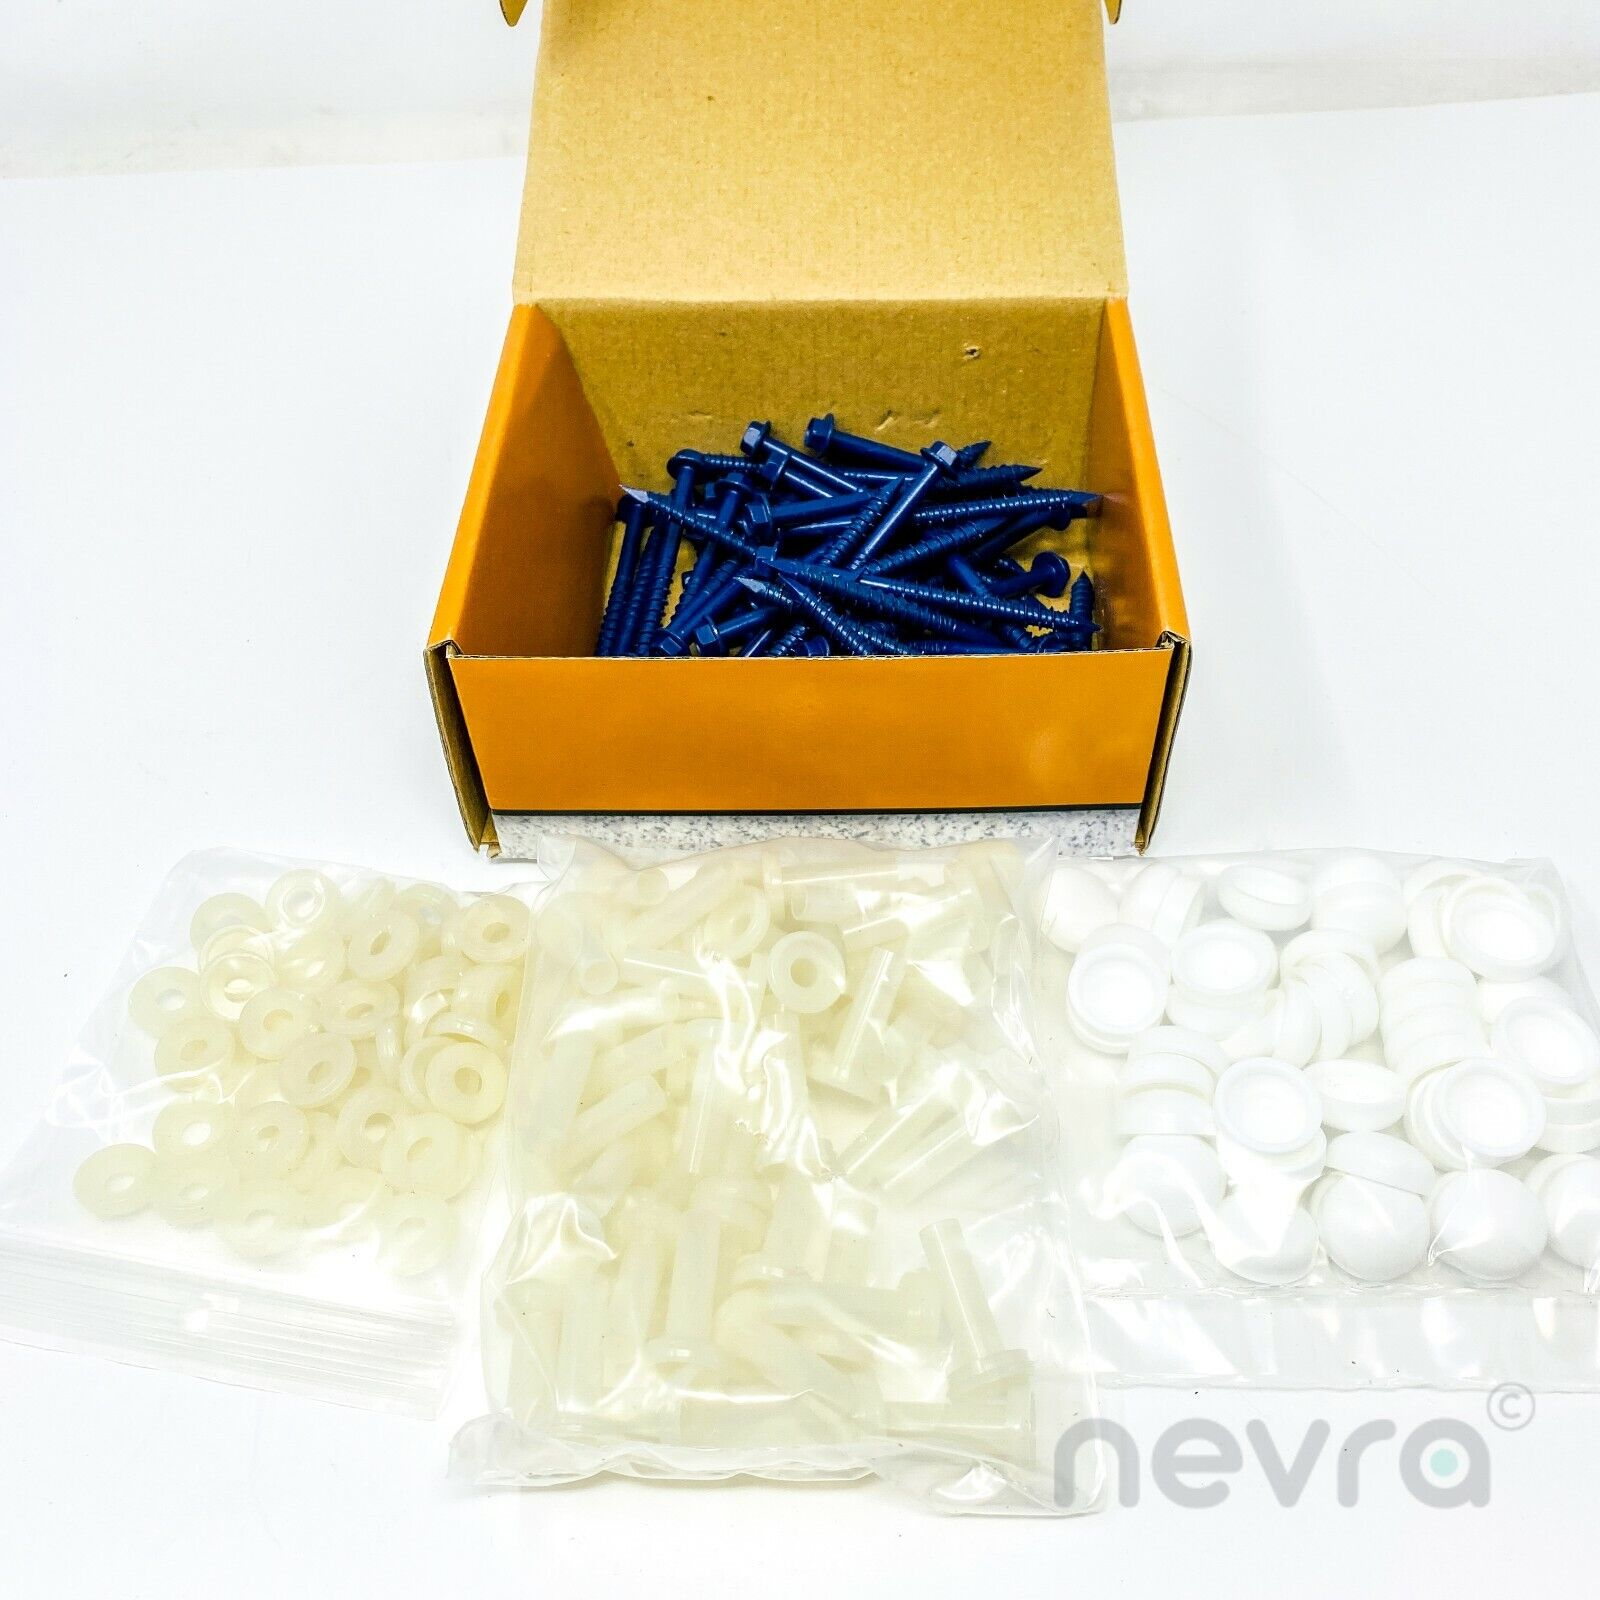 200 pcs Set Pro-Tect WHITE Blue-Tap Concrete Screws, Sleeves, Washers and Caps PRO-TECT Does Not Apply - фотография #6